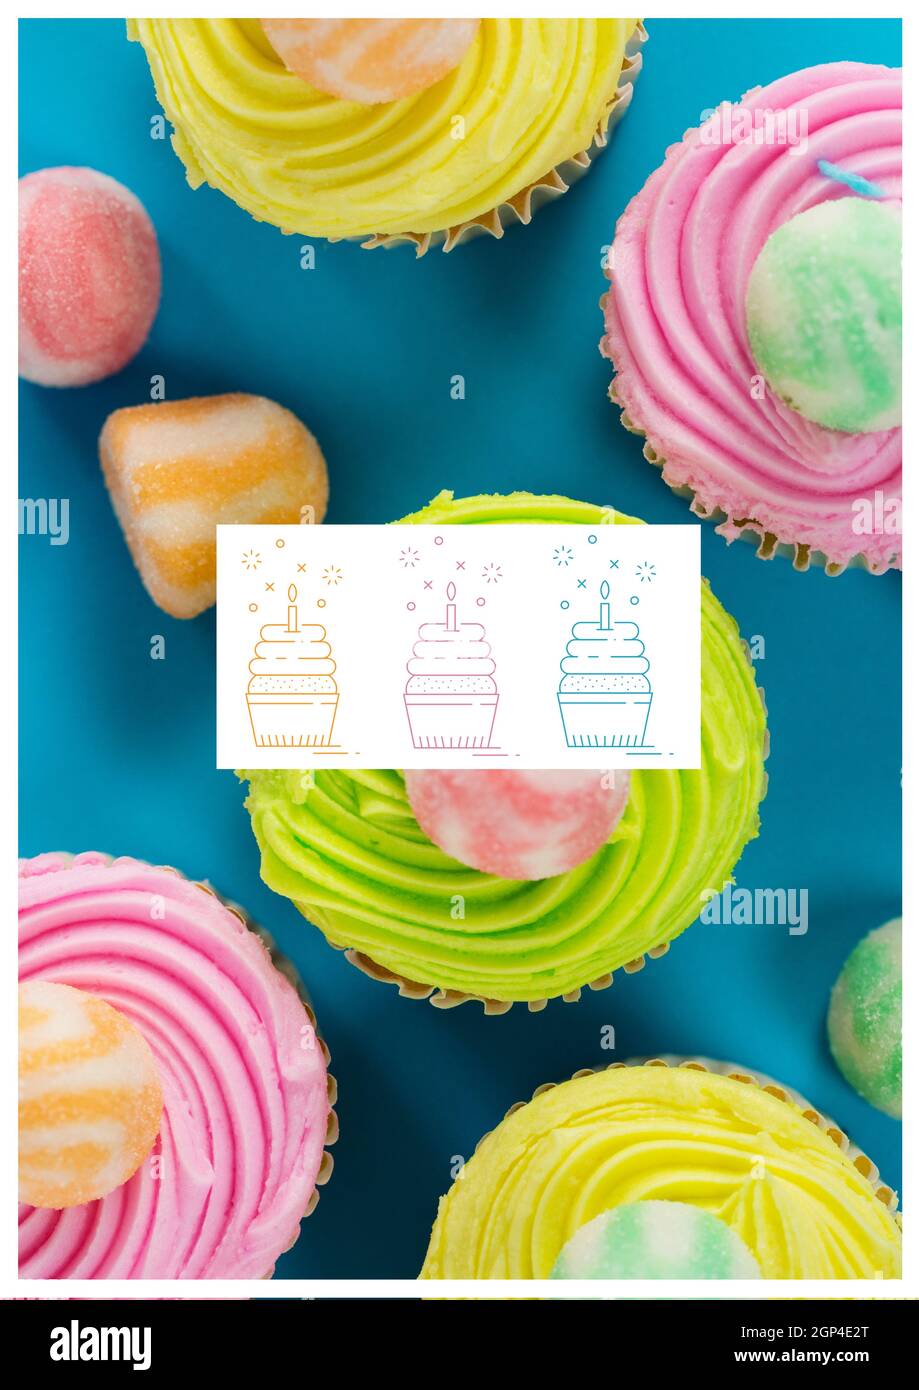 Composition of multiple fresh cupcakes on blue background Stock Photo